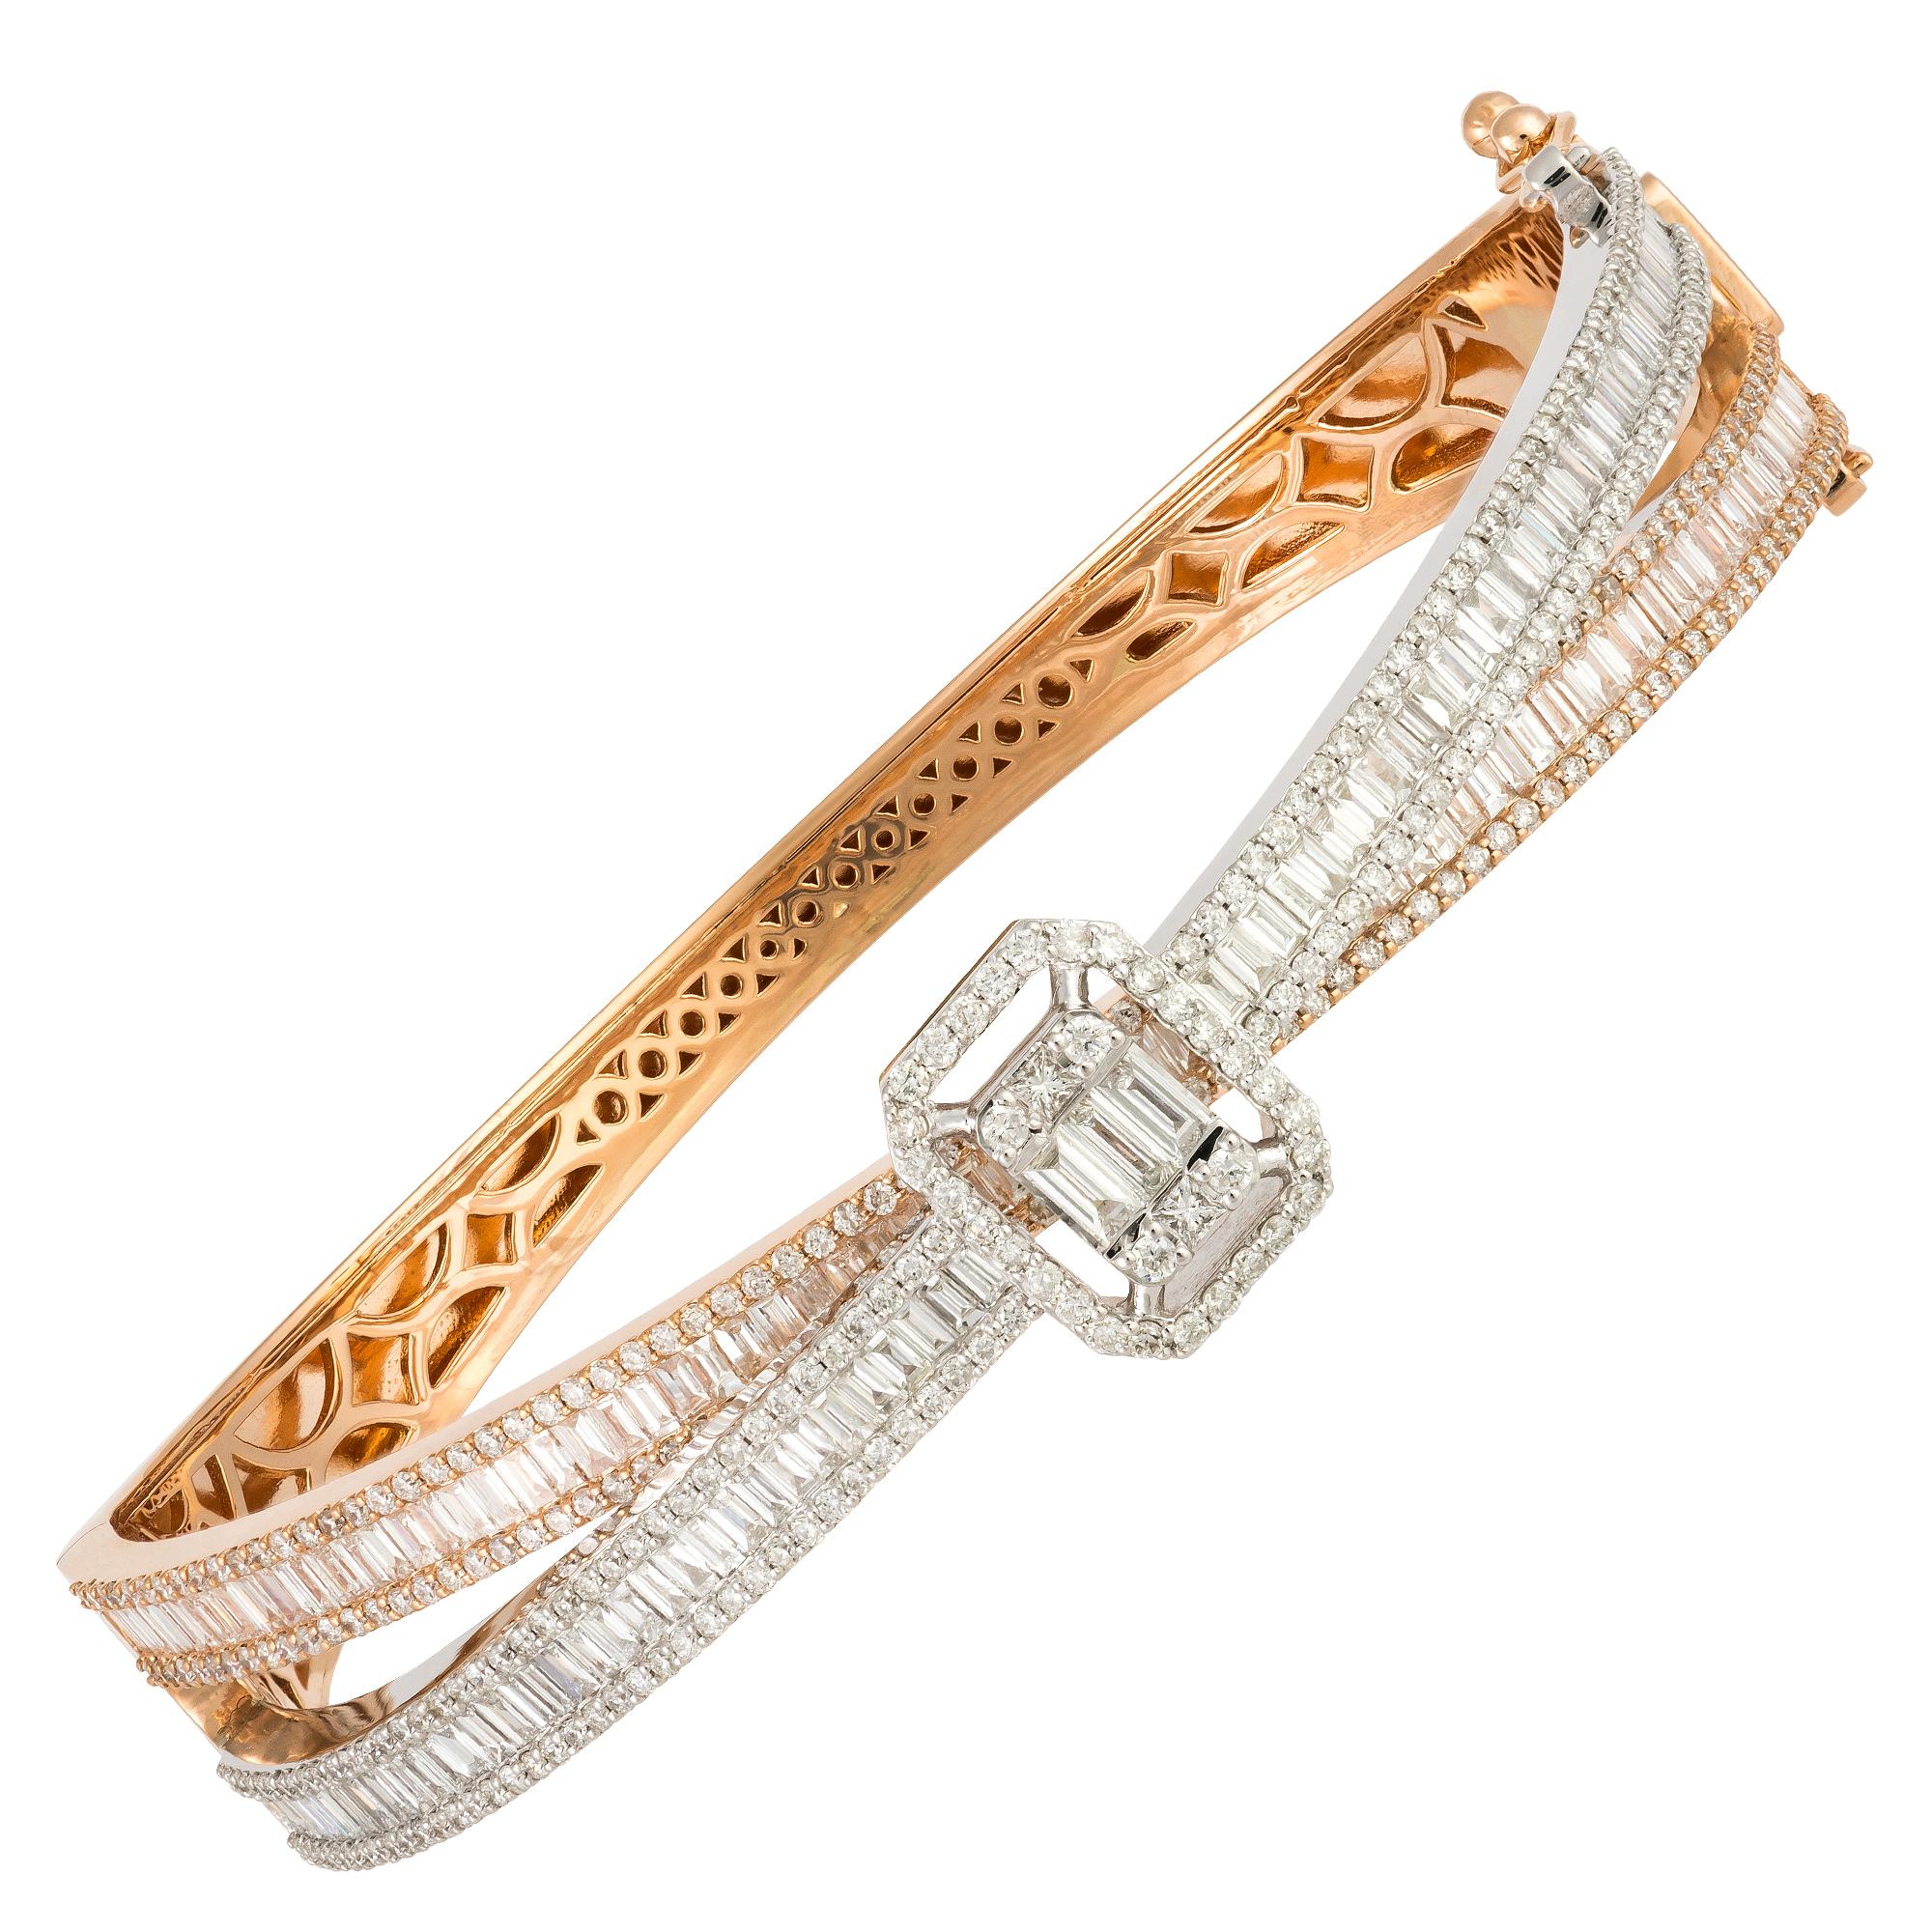 Modern Exclusive White Pink Gold 18K Bracelet Diamond For Her For Sale